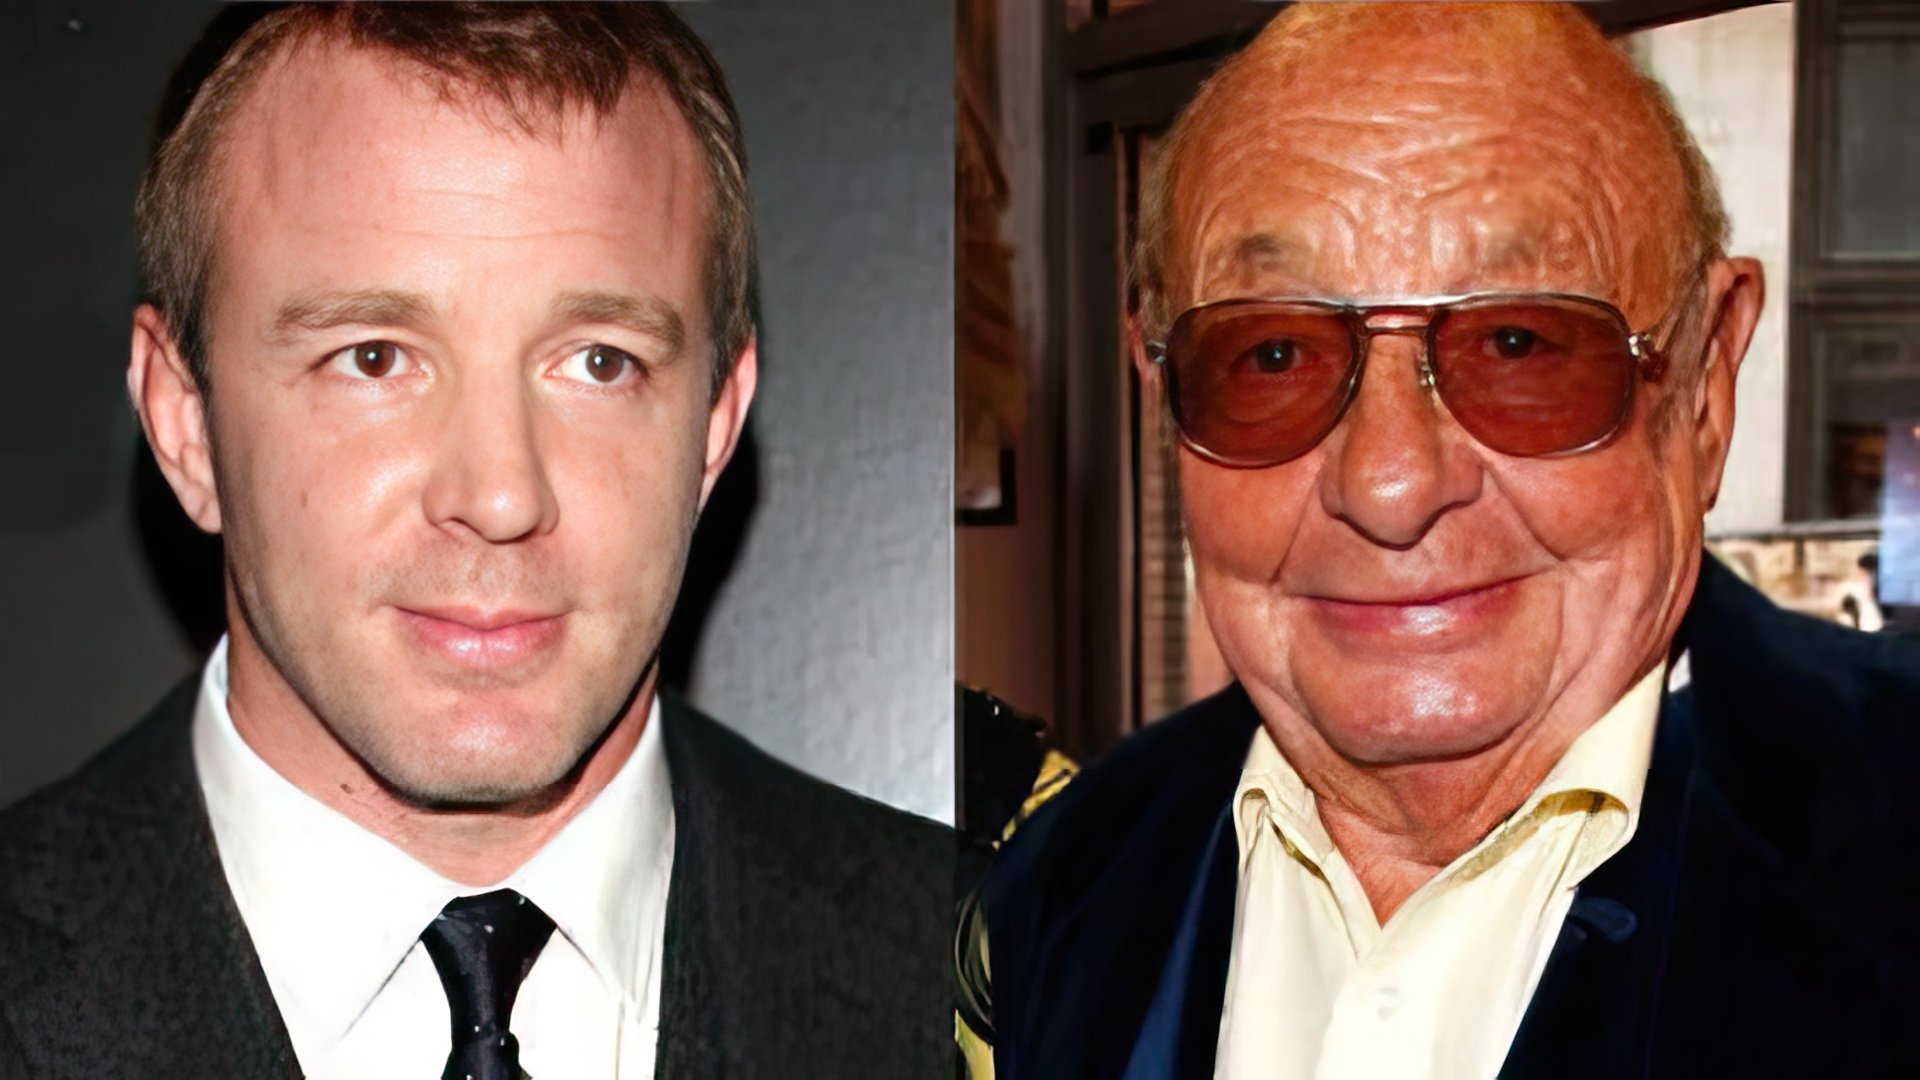 Guy Ritchie’s father- a former servant